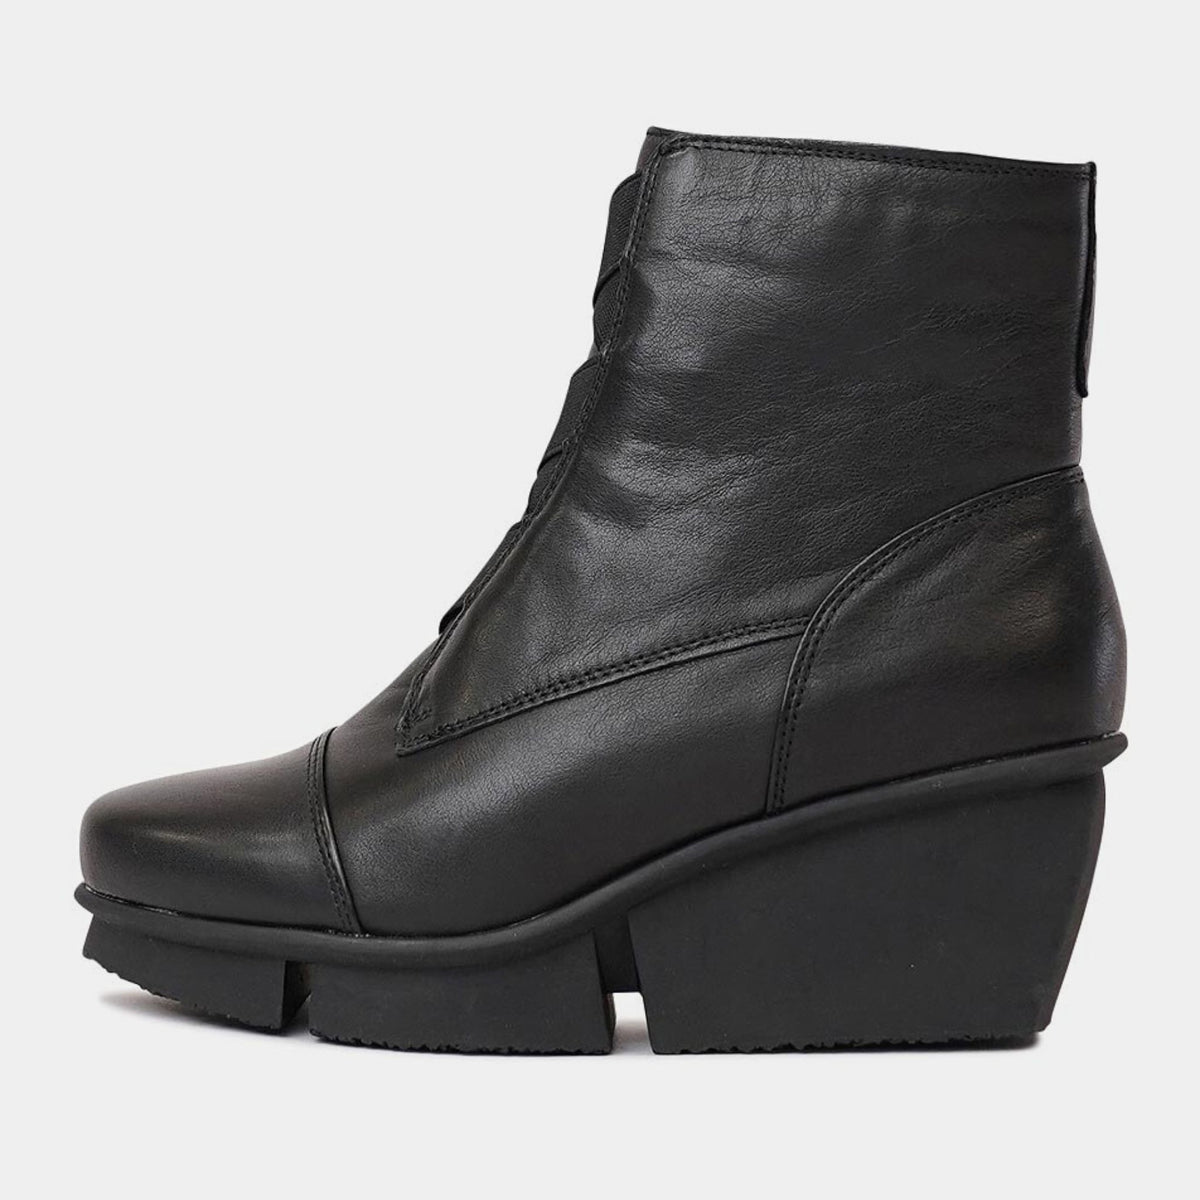 Orient Black Leather Wedge Boots